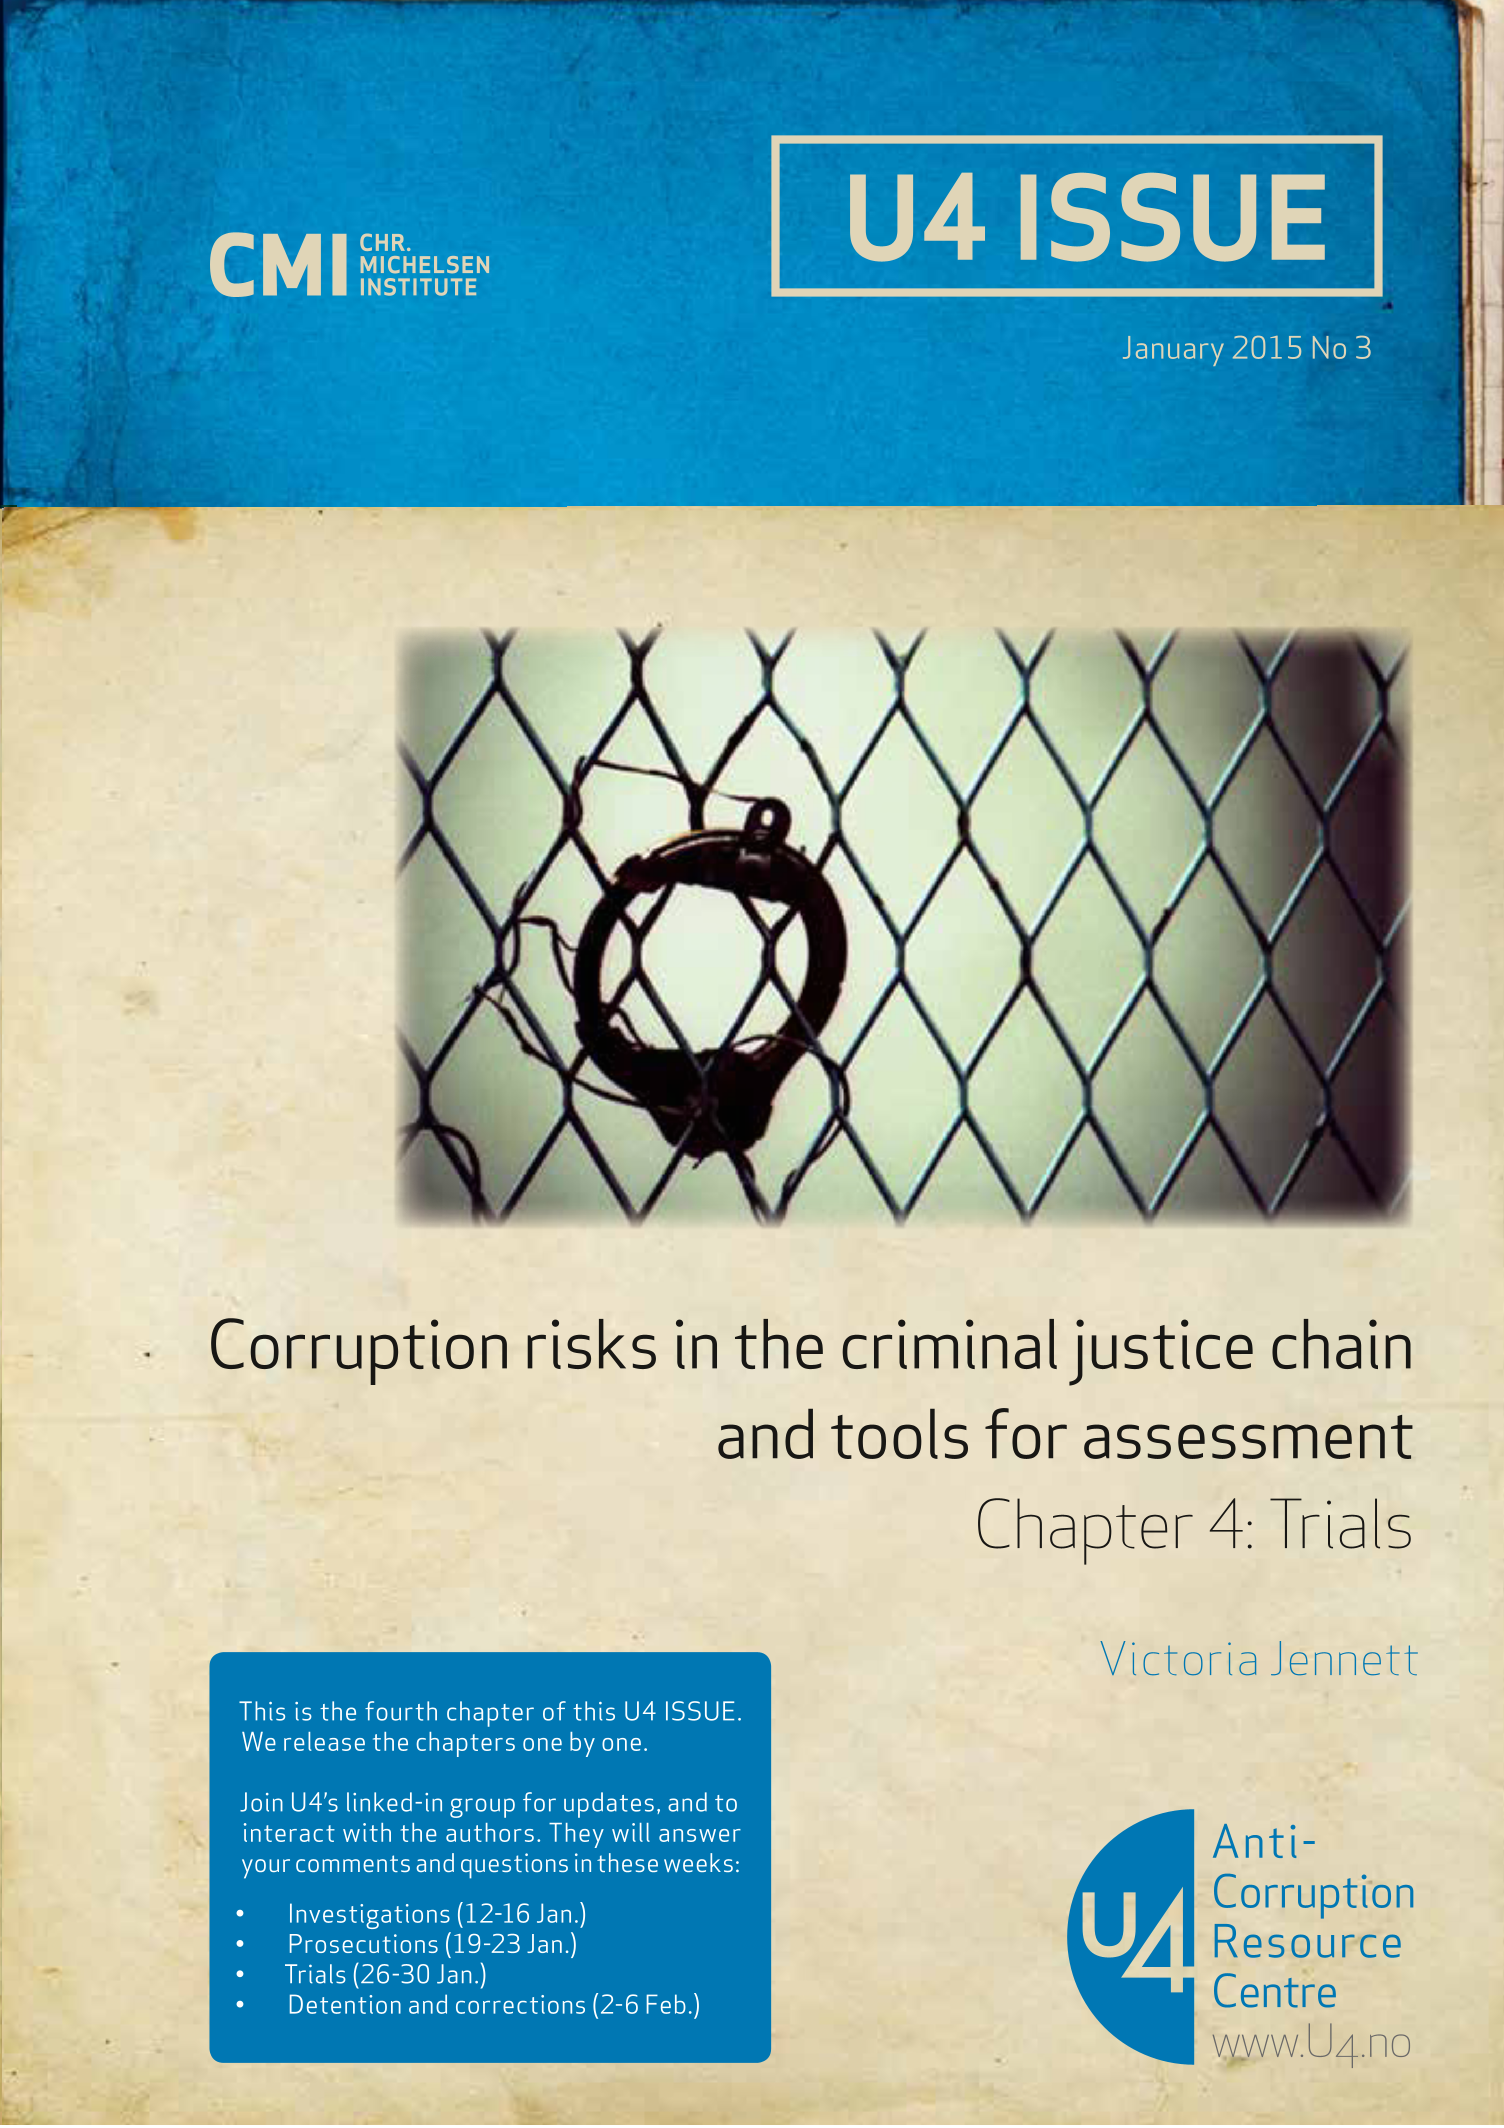 Corruption risks in the criminal justice chain and tools for assessment. Chapter 4: Trials